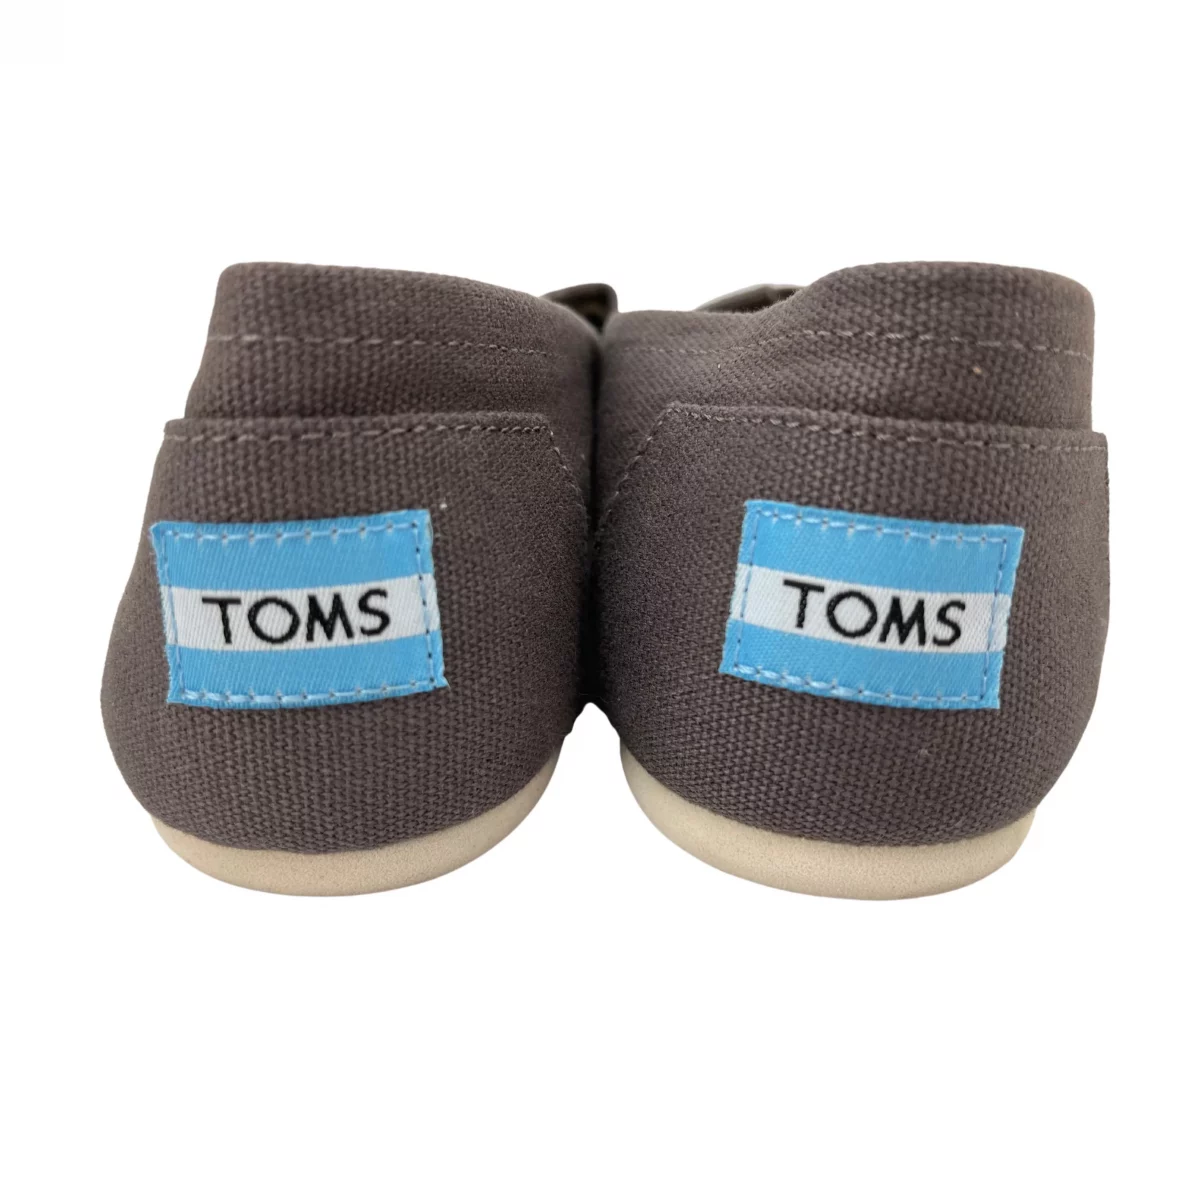 Toms Women's Canvas Shoes / Slip On / Ash Grey / Size 8 **No Tags**